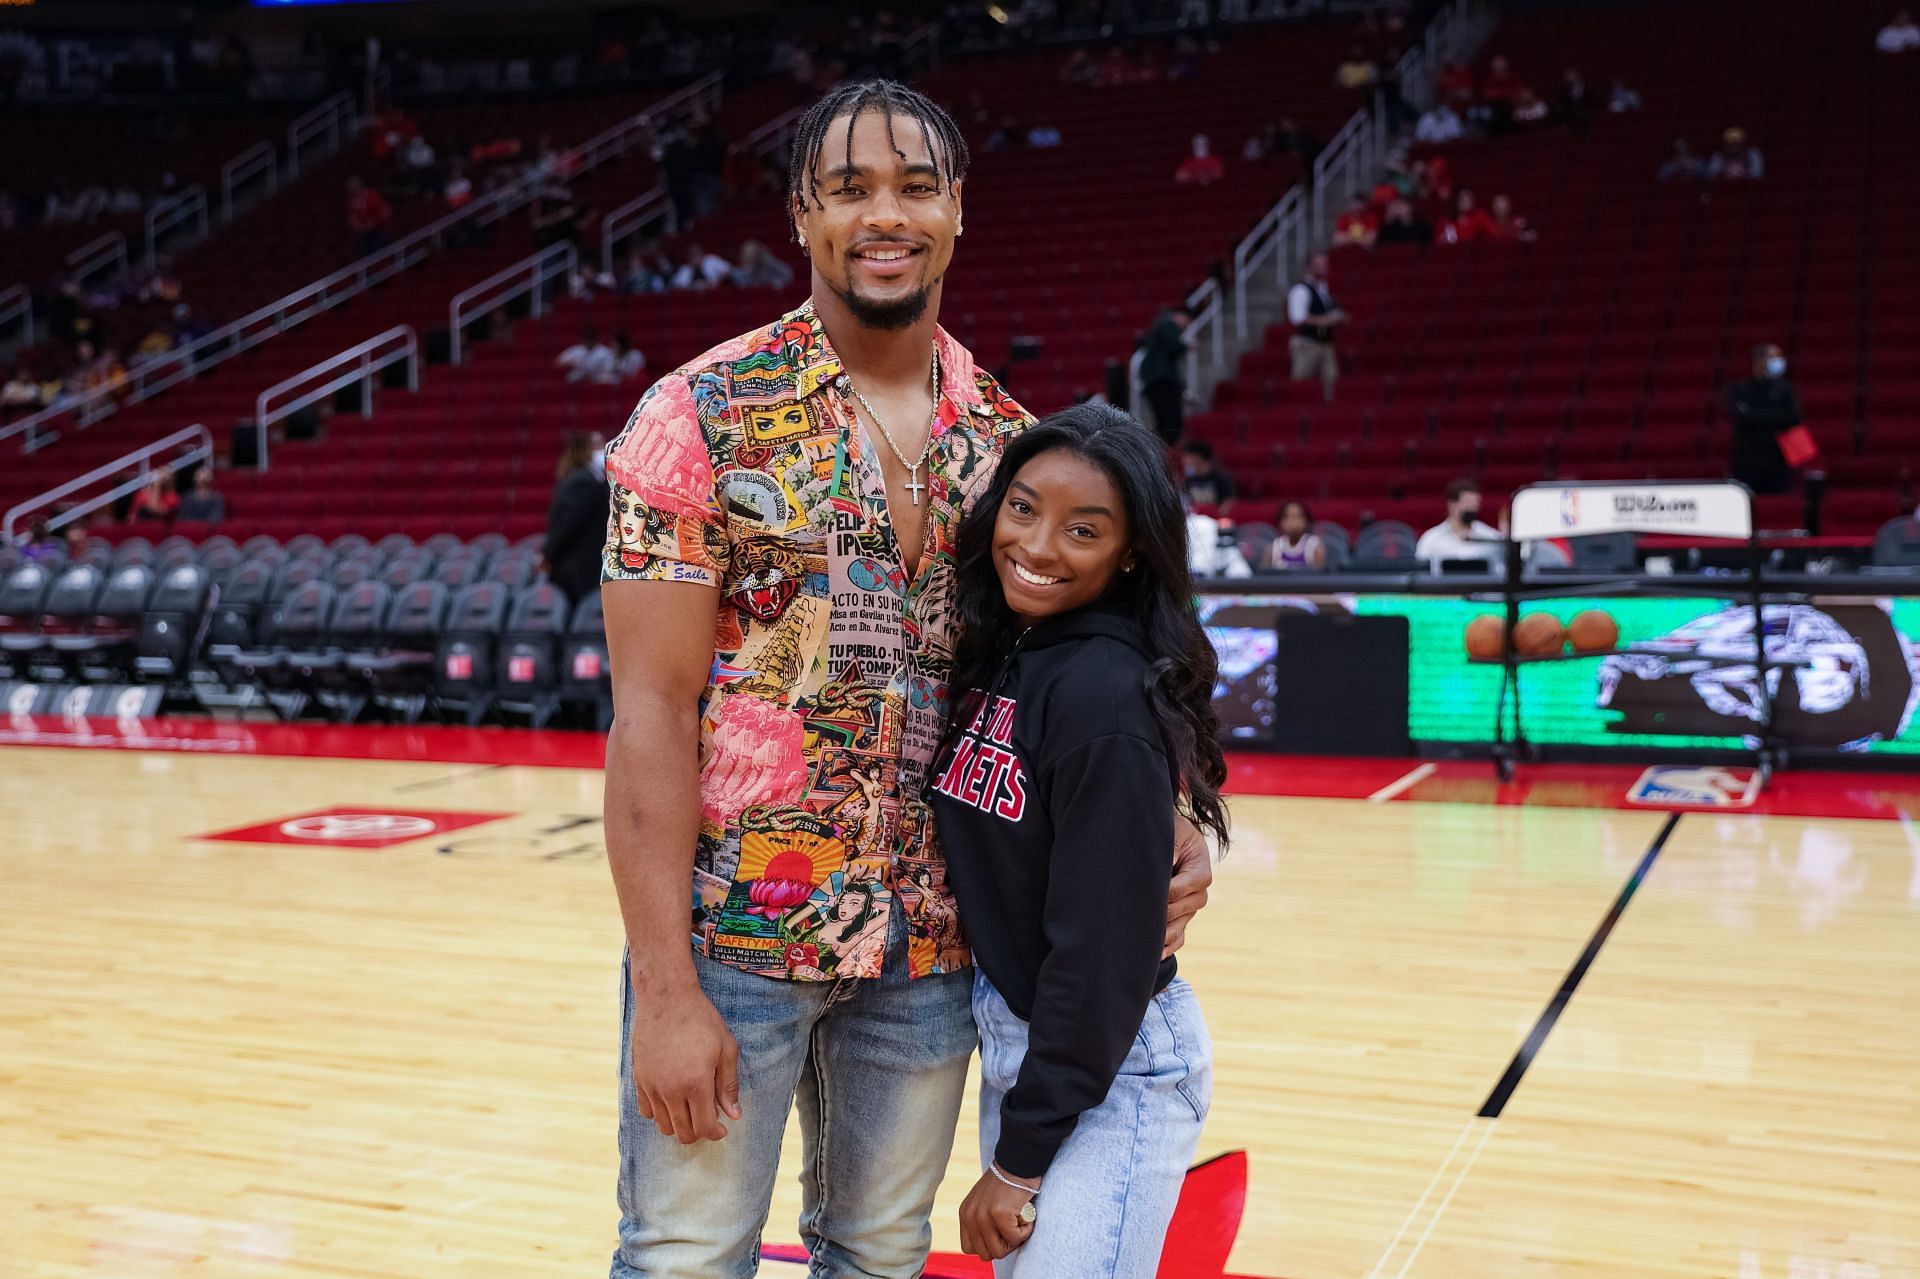 Simone Biles and Jonathan Owens attend a game between the Houston Rockets and the Los Angeles Lakers at Toyota Center on December 28, 2021 in Houston, Texas. NOTE TO USER: User expressly acknowledges and agrees that, by downloading and or using this photograph, User is consenting to the terms and conditions of the Getty Images License Agreement. (Photo by Carmen Mandato/Getty Images)